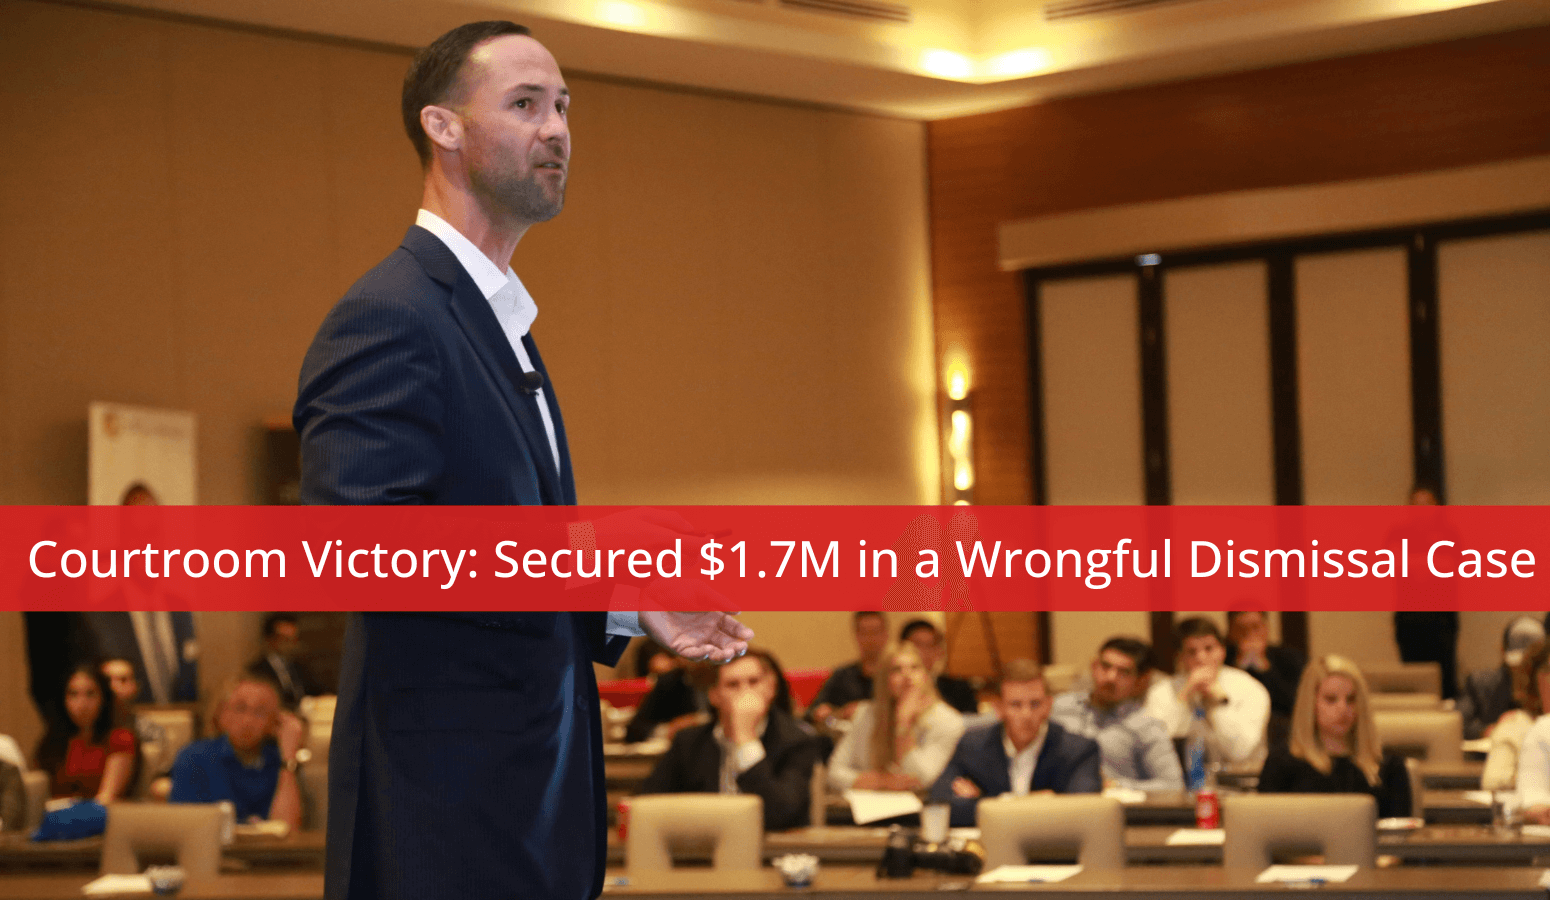 Featured image for “Courtroom Victory: Secured $1.7M in a Wrongful Dismissal Case”